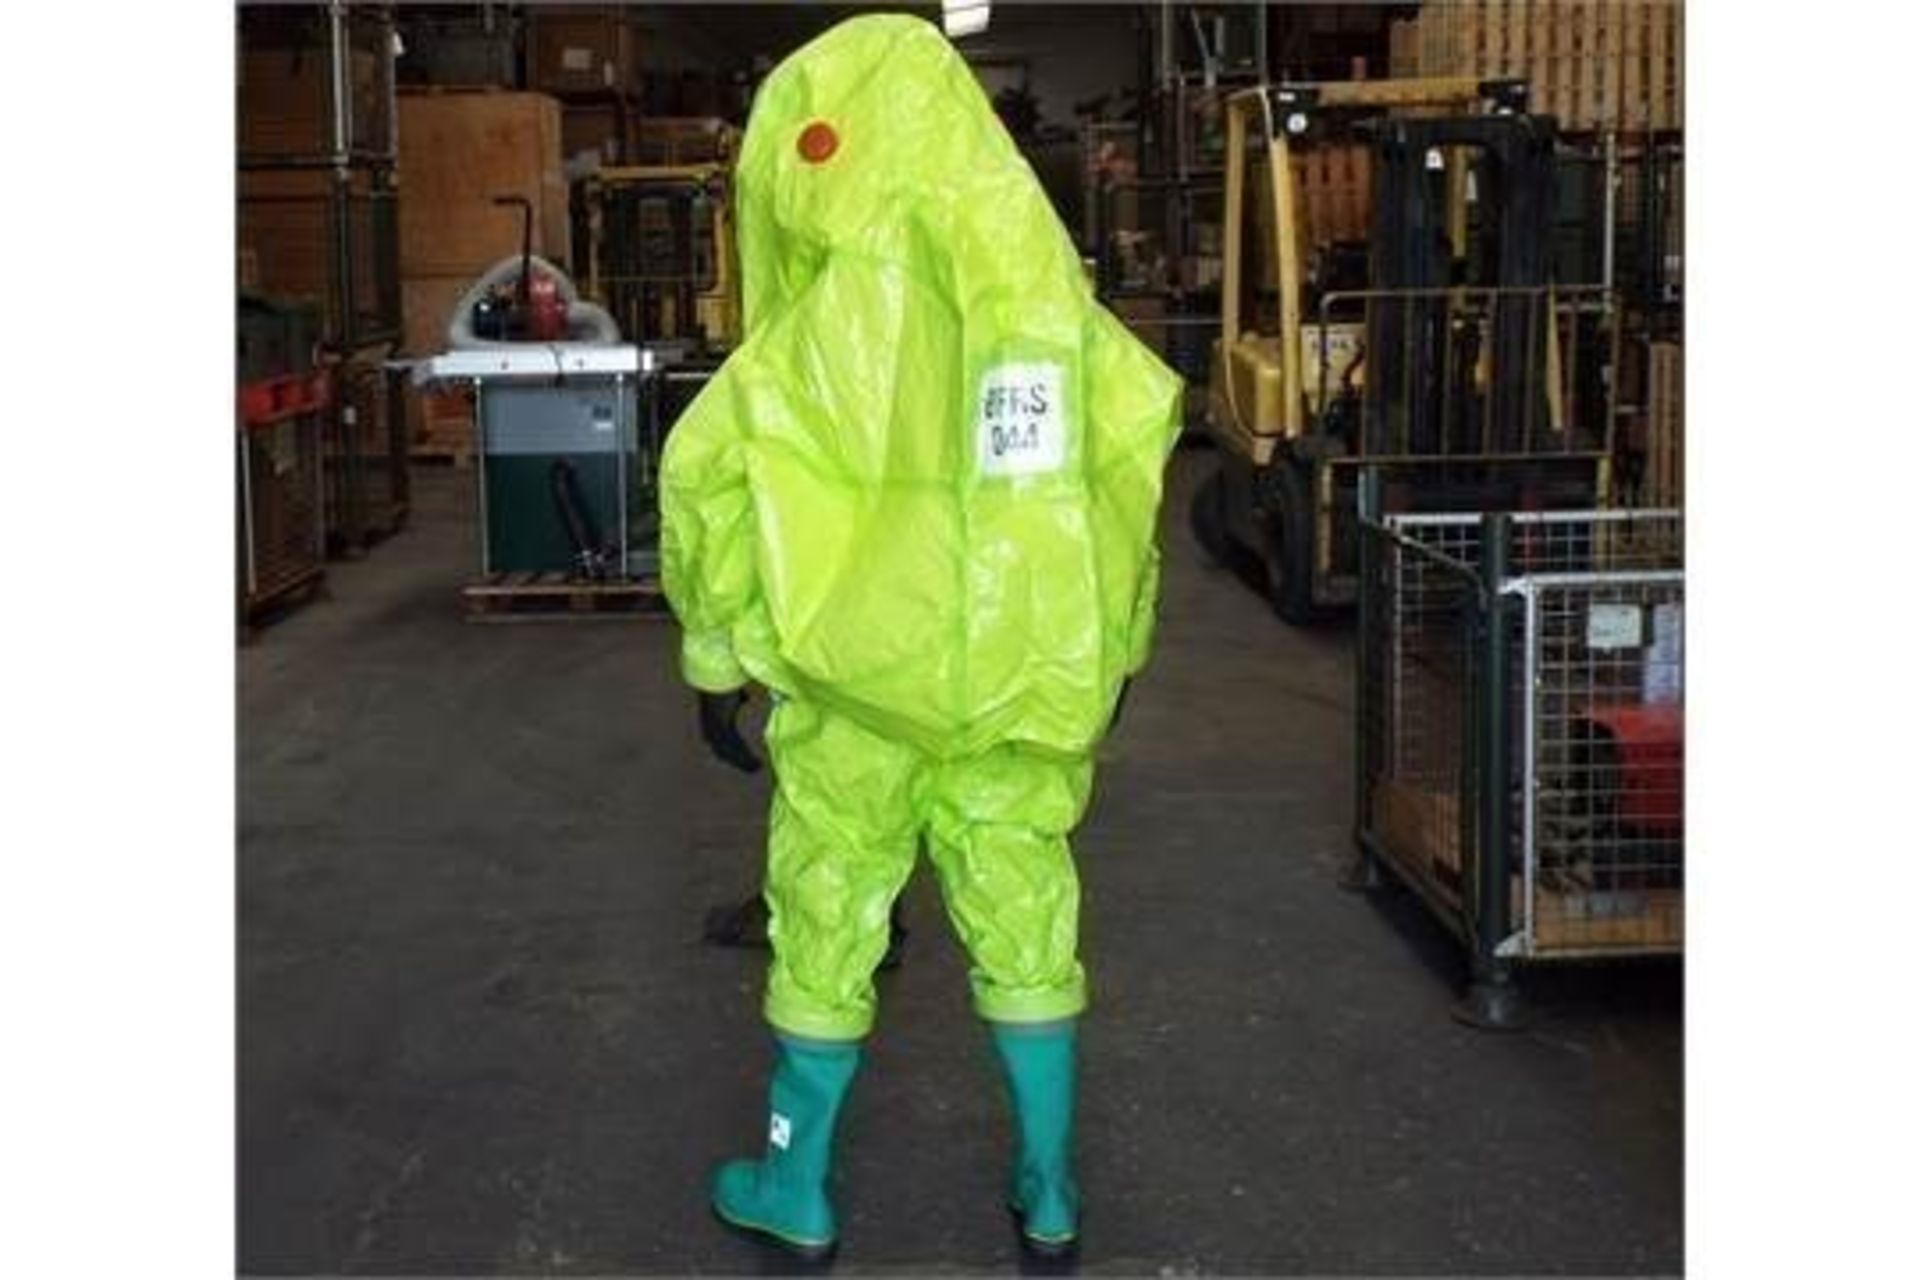 1 x Unissued Respirex Tychem TK Gas-Tight Hazmat Suit Type 1A with Attached Boots and Gloves. Medium - Image 5 of 8